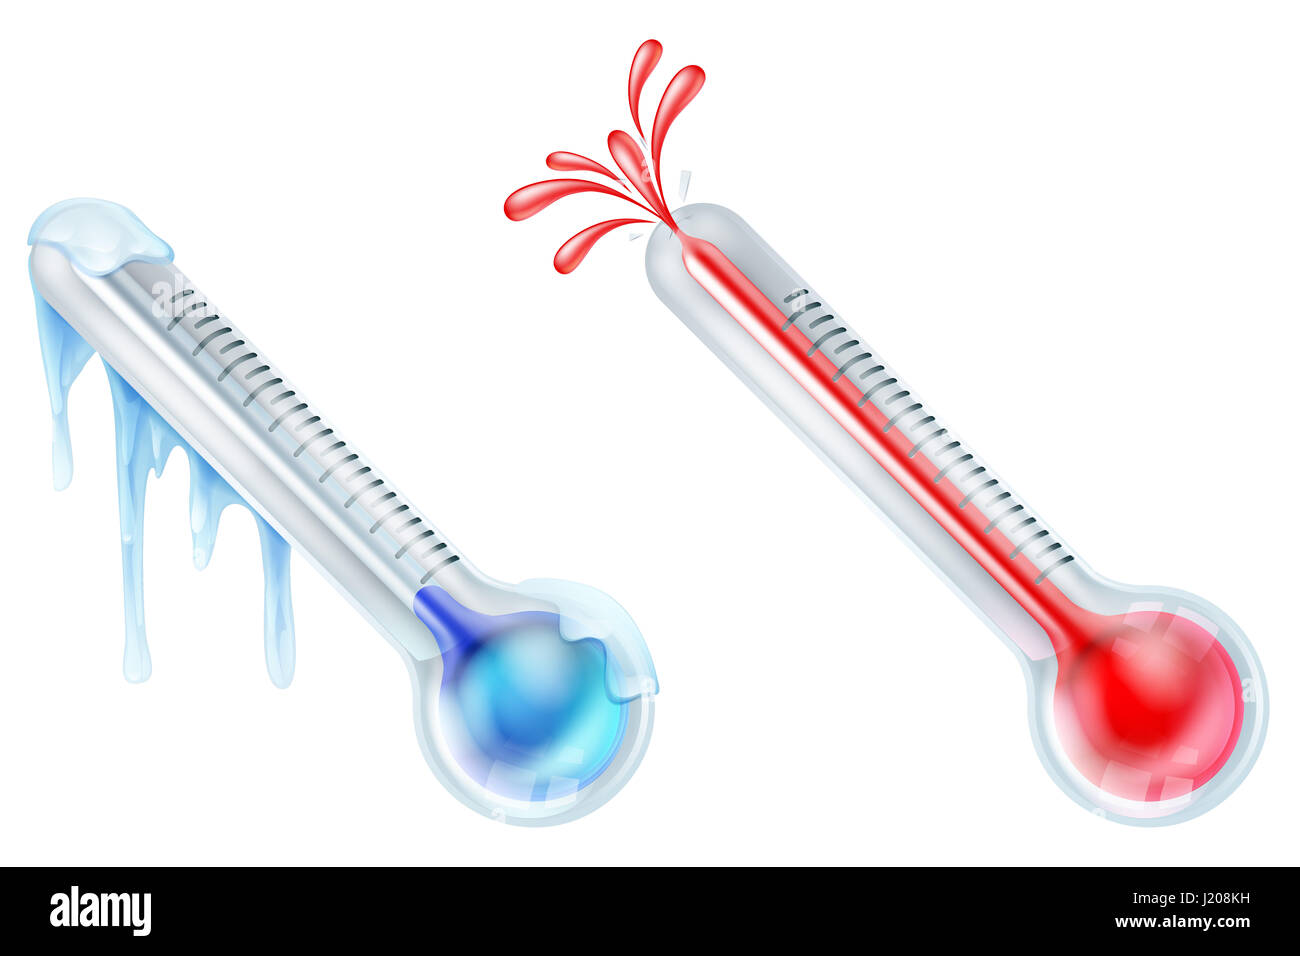 Hot and cold thermometer icon set with one frozen and one bursting Stock Photo